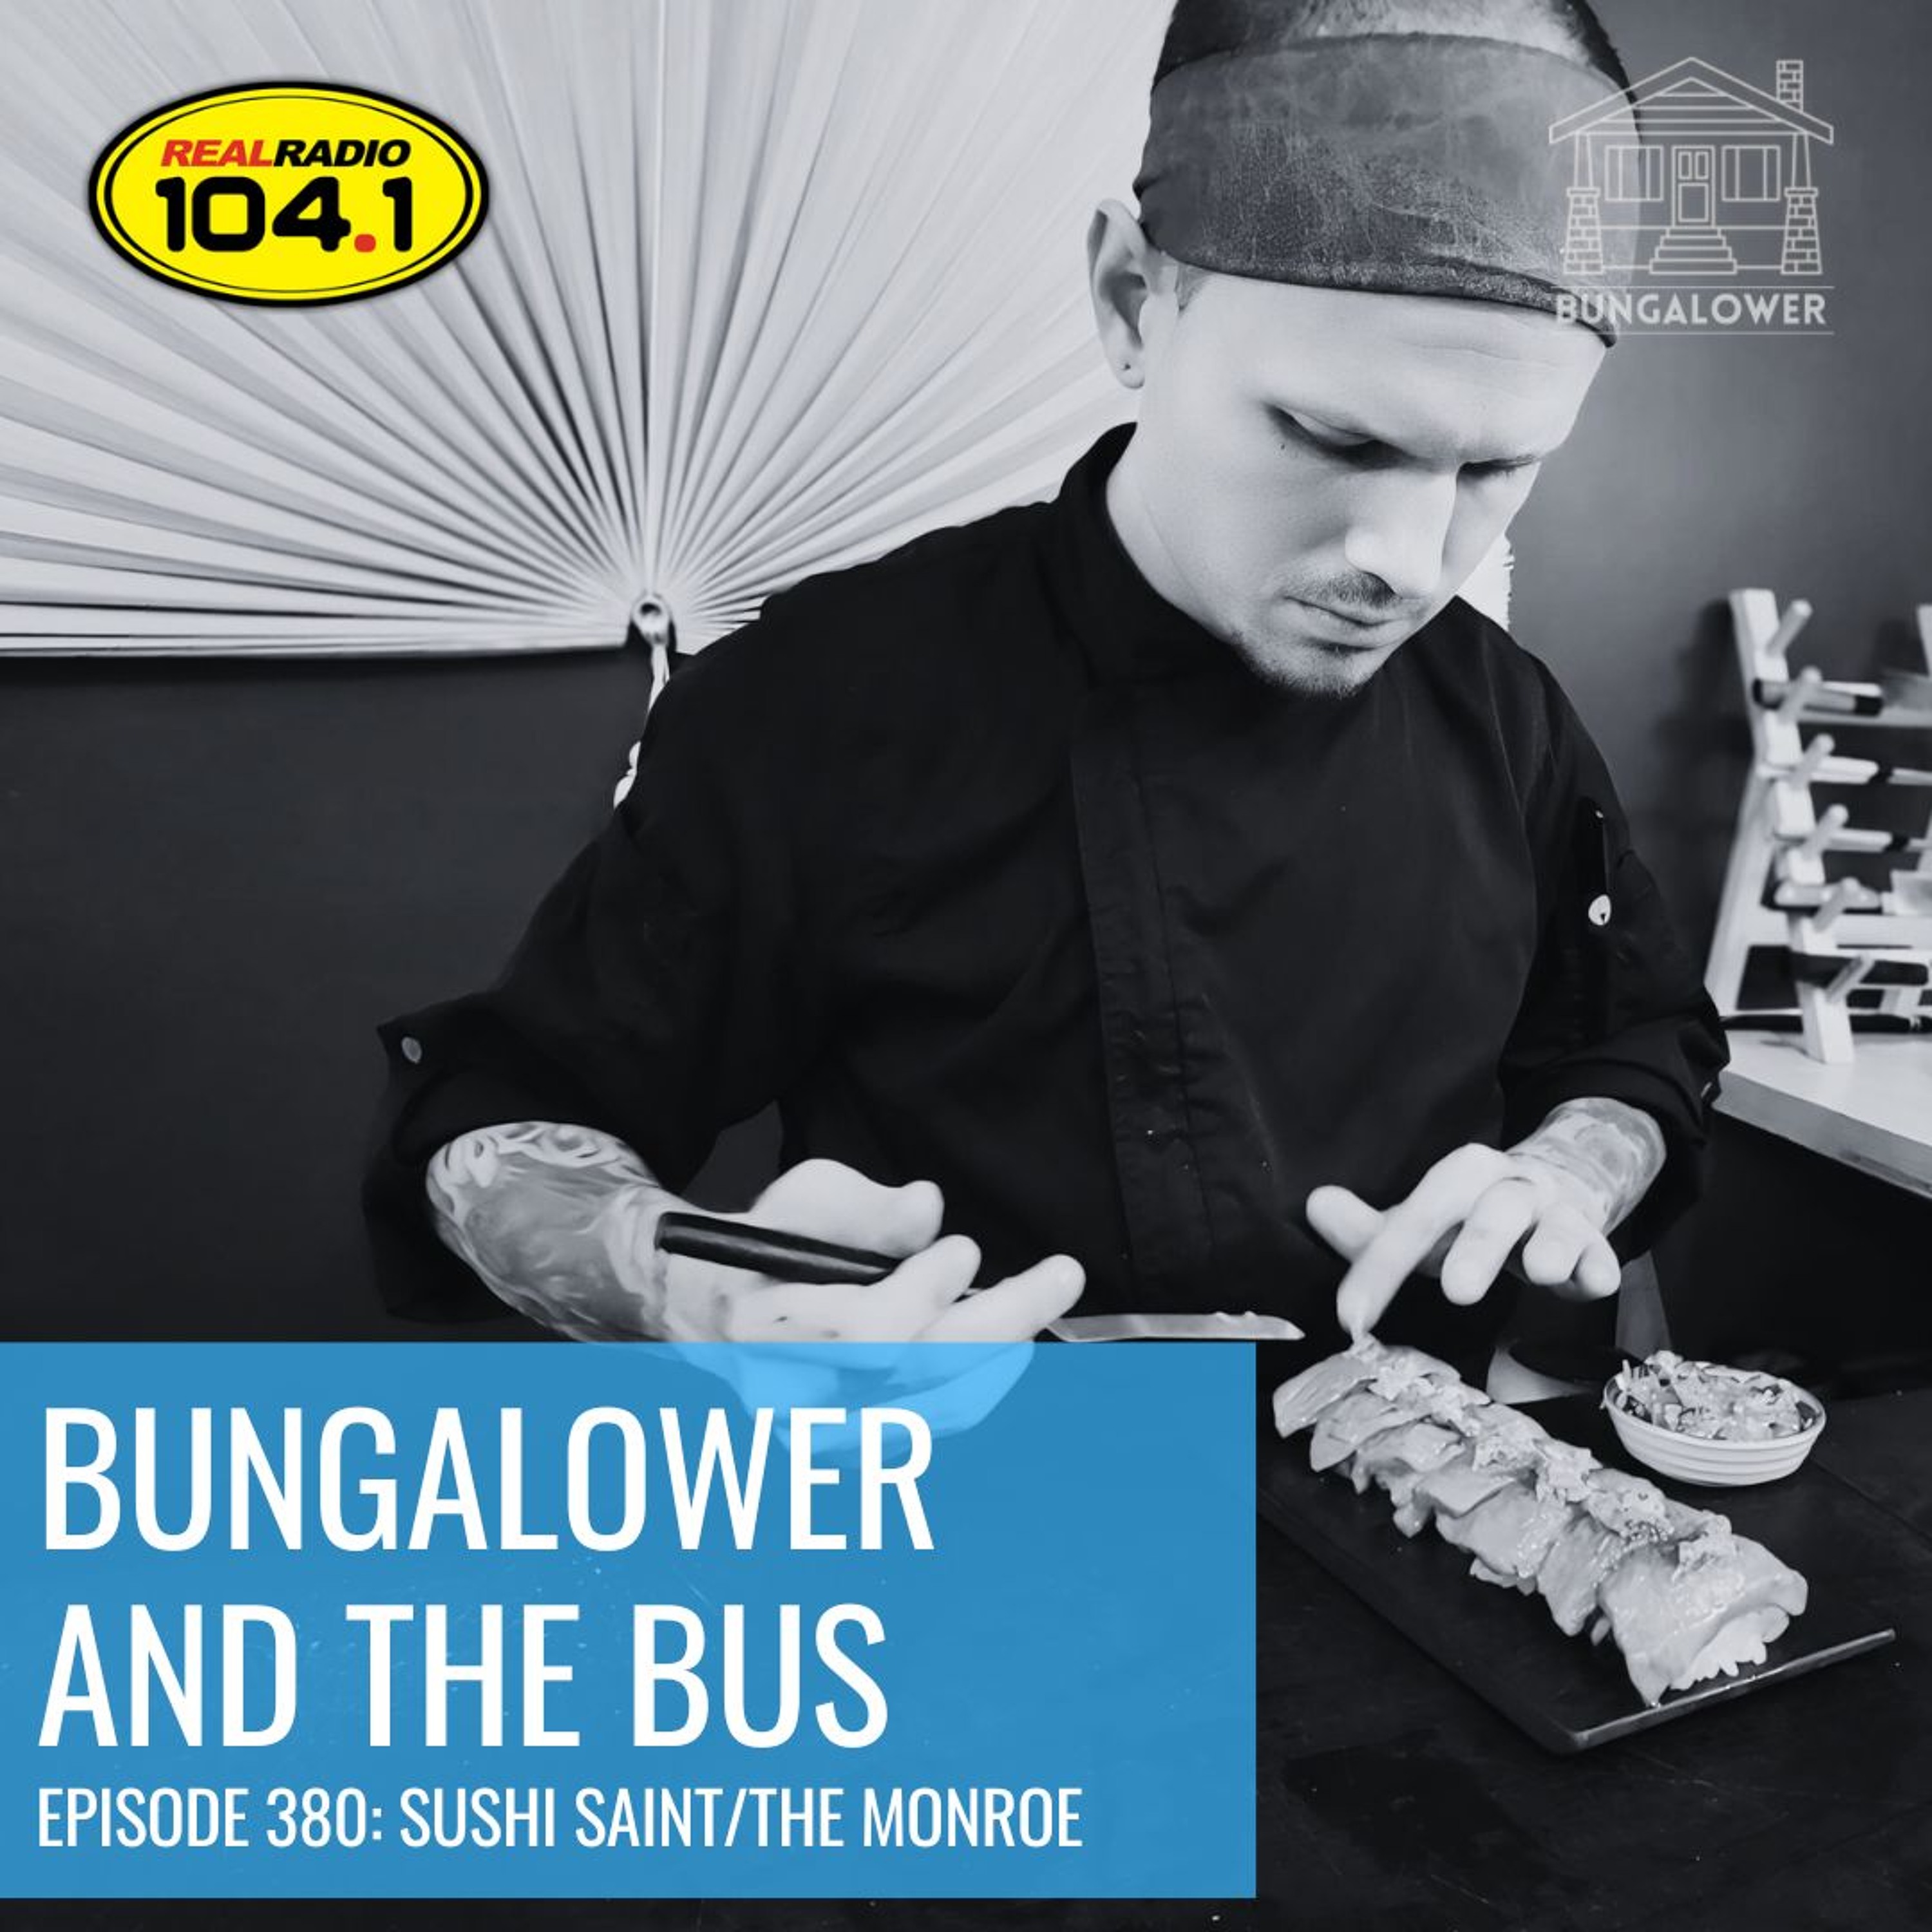 Bungalower and The Bus: Episode 380 (Sushi Saint/ The Monroe)